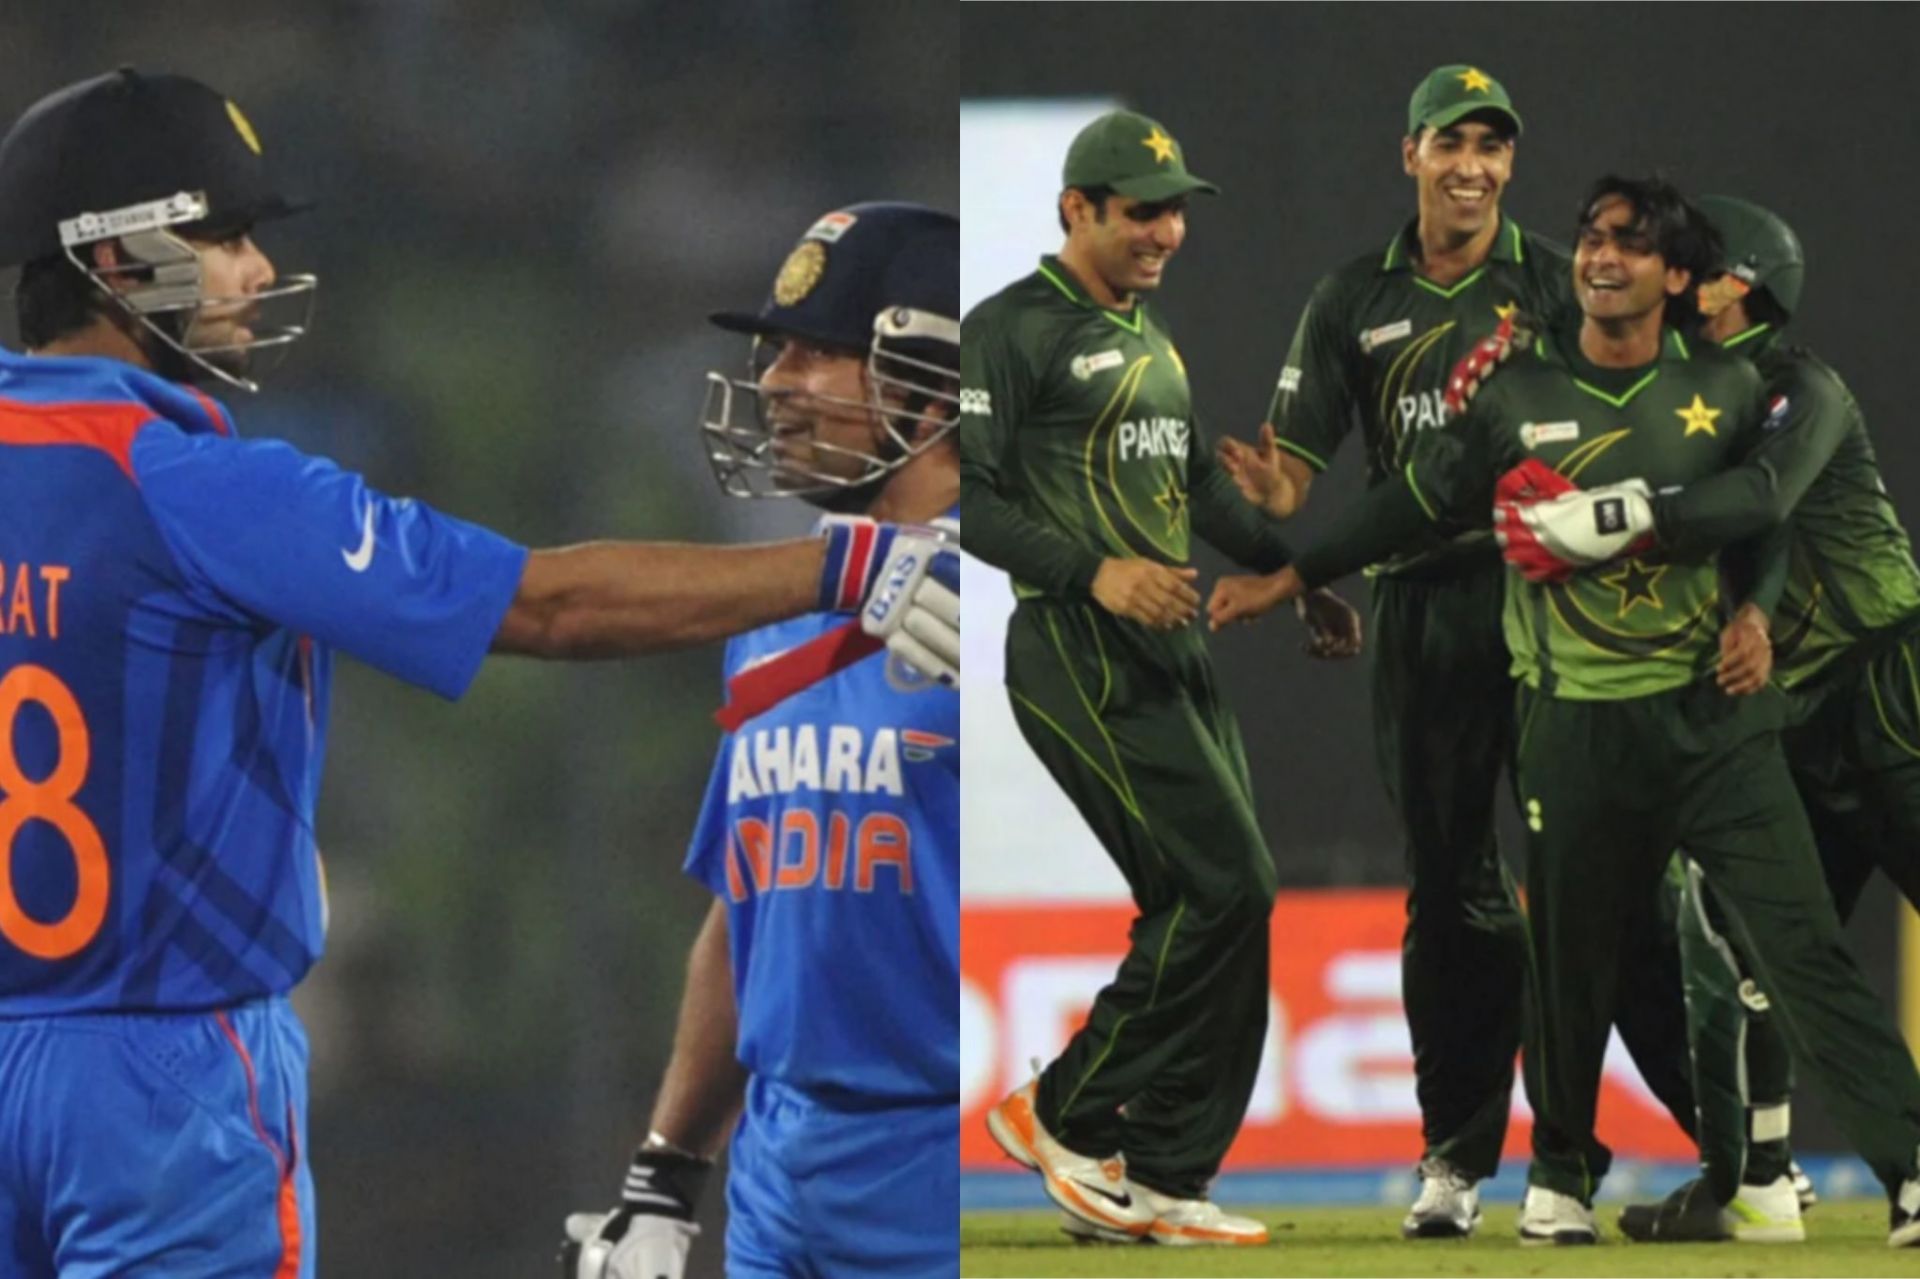 India and Pakistan have put up some classic matches over the years [Getty Images]